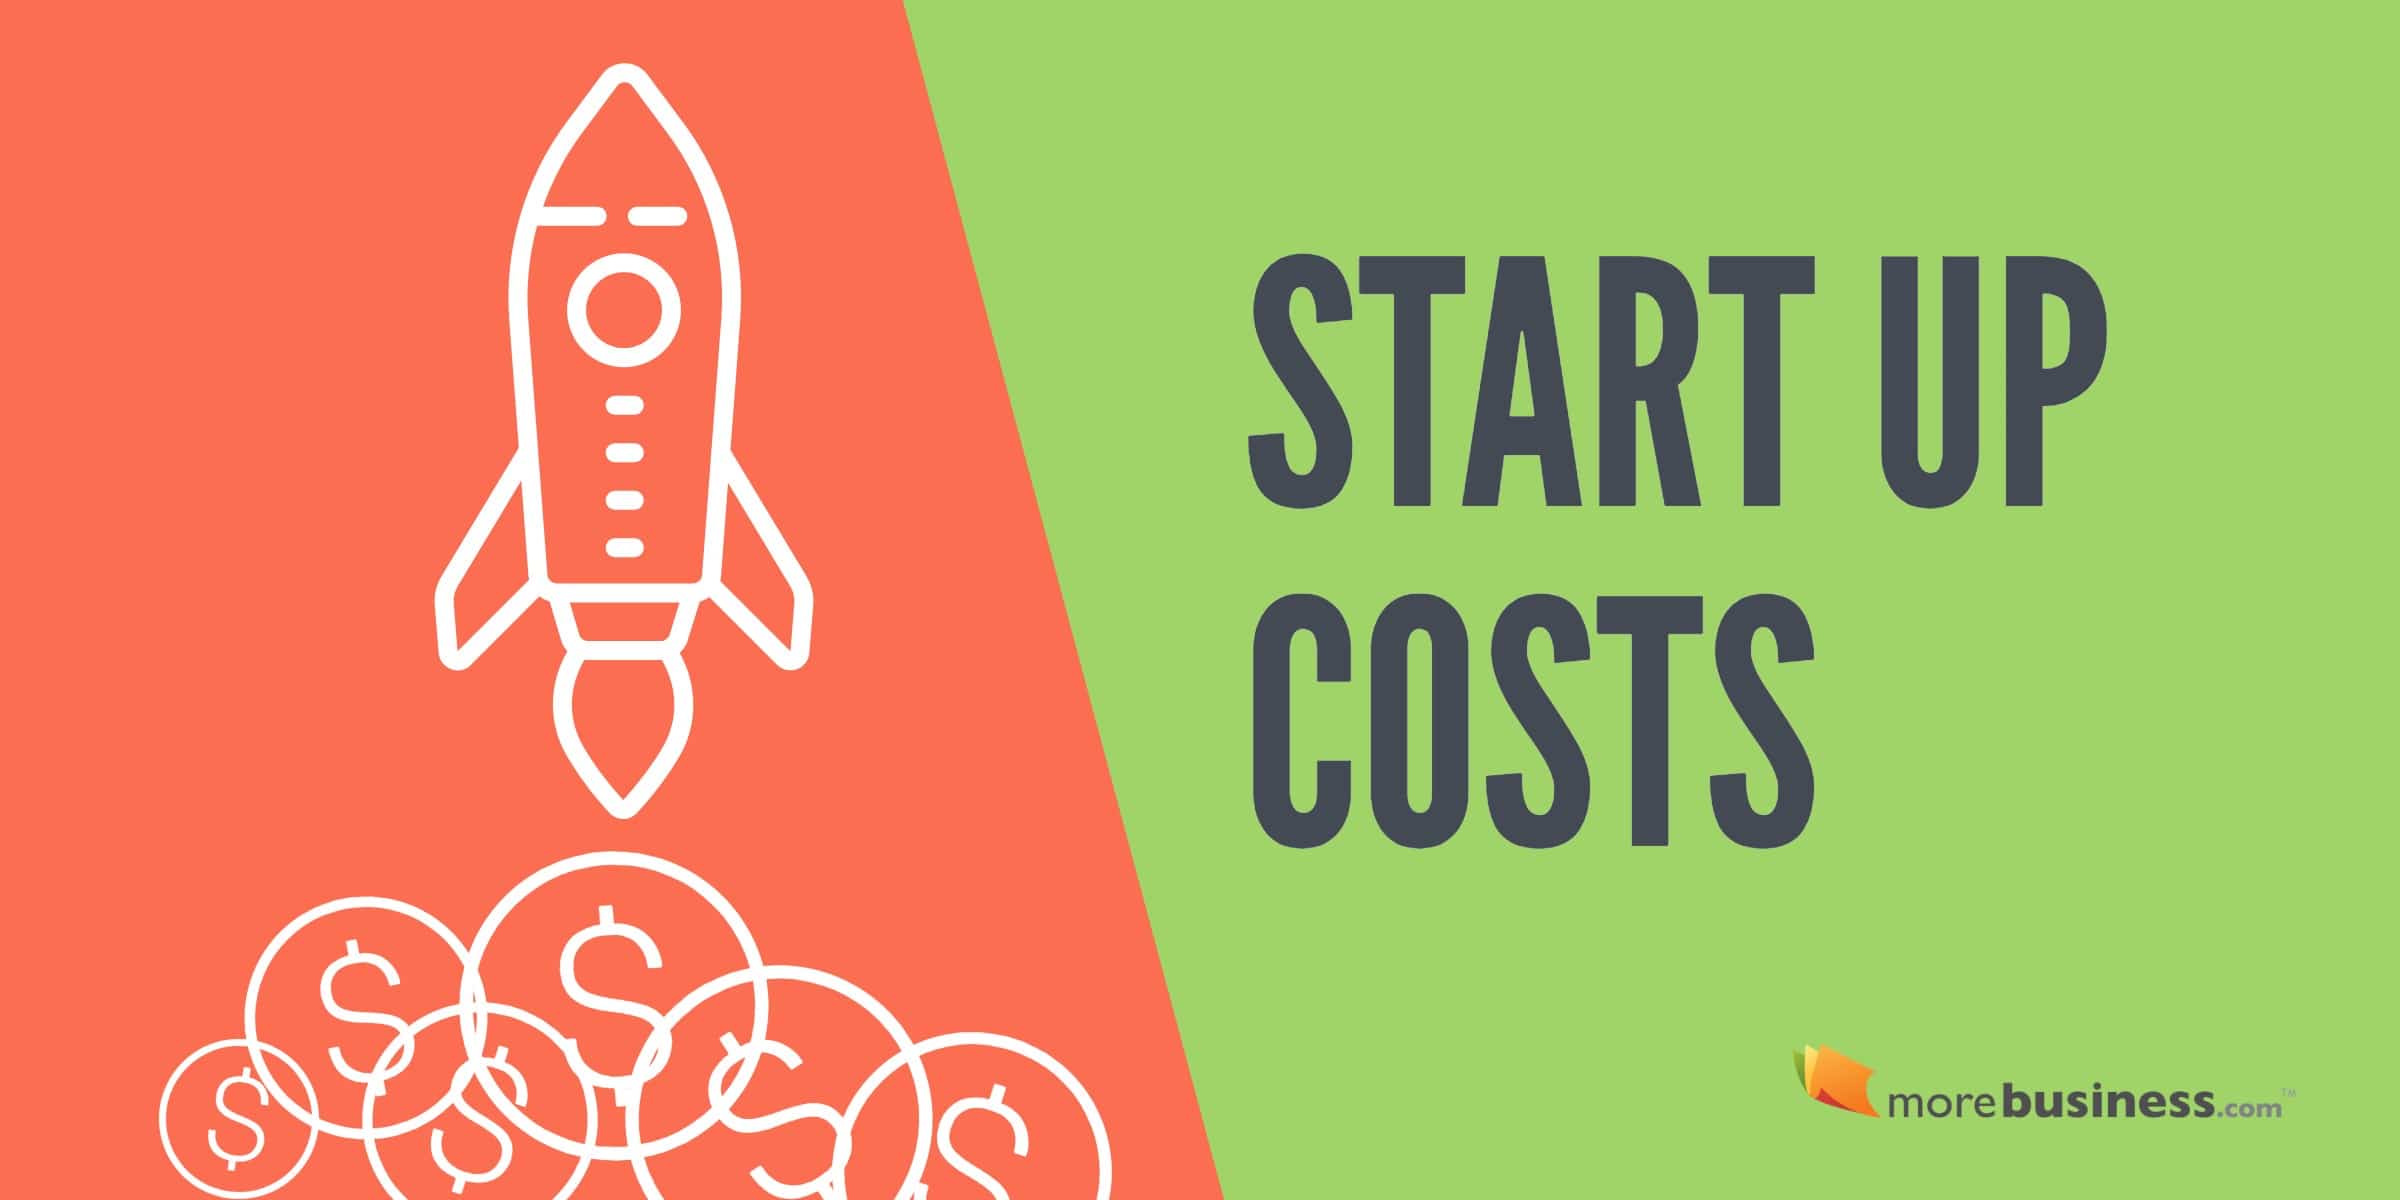 How to Estimate Your Small Business Start Up Costs